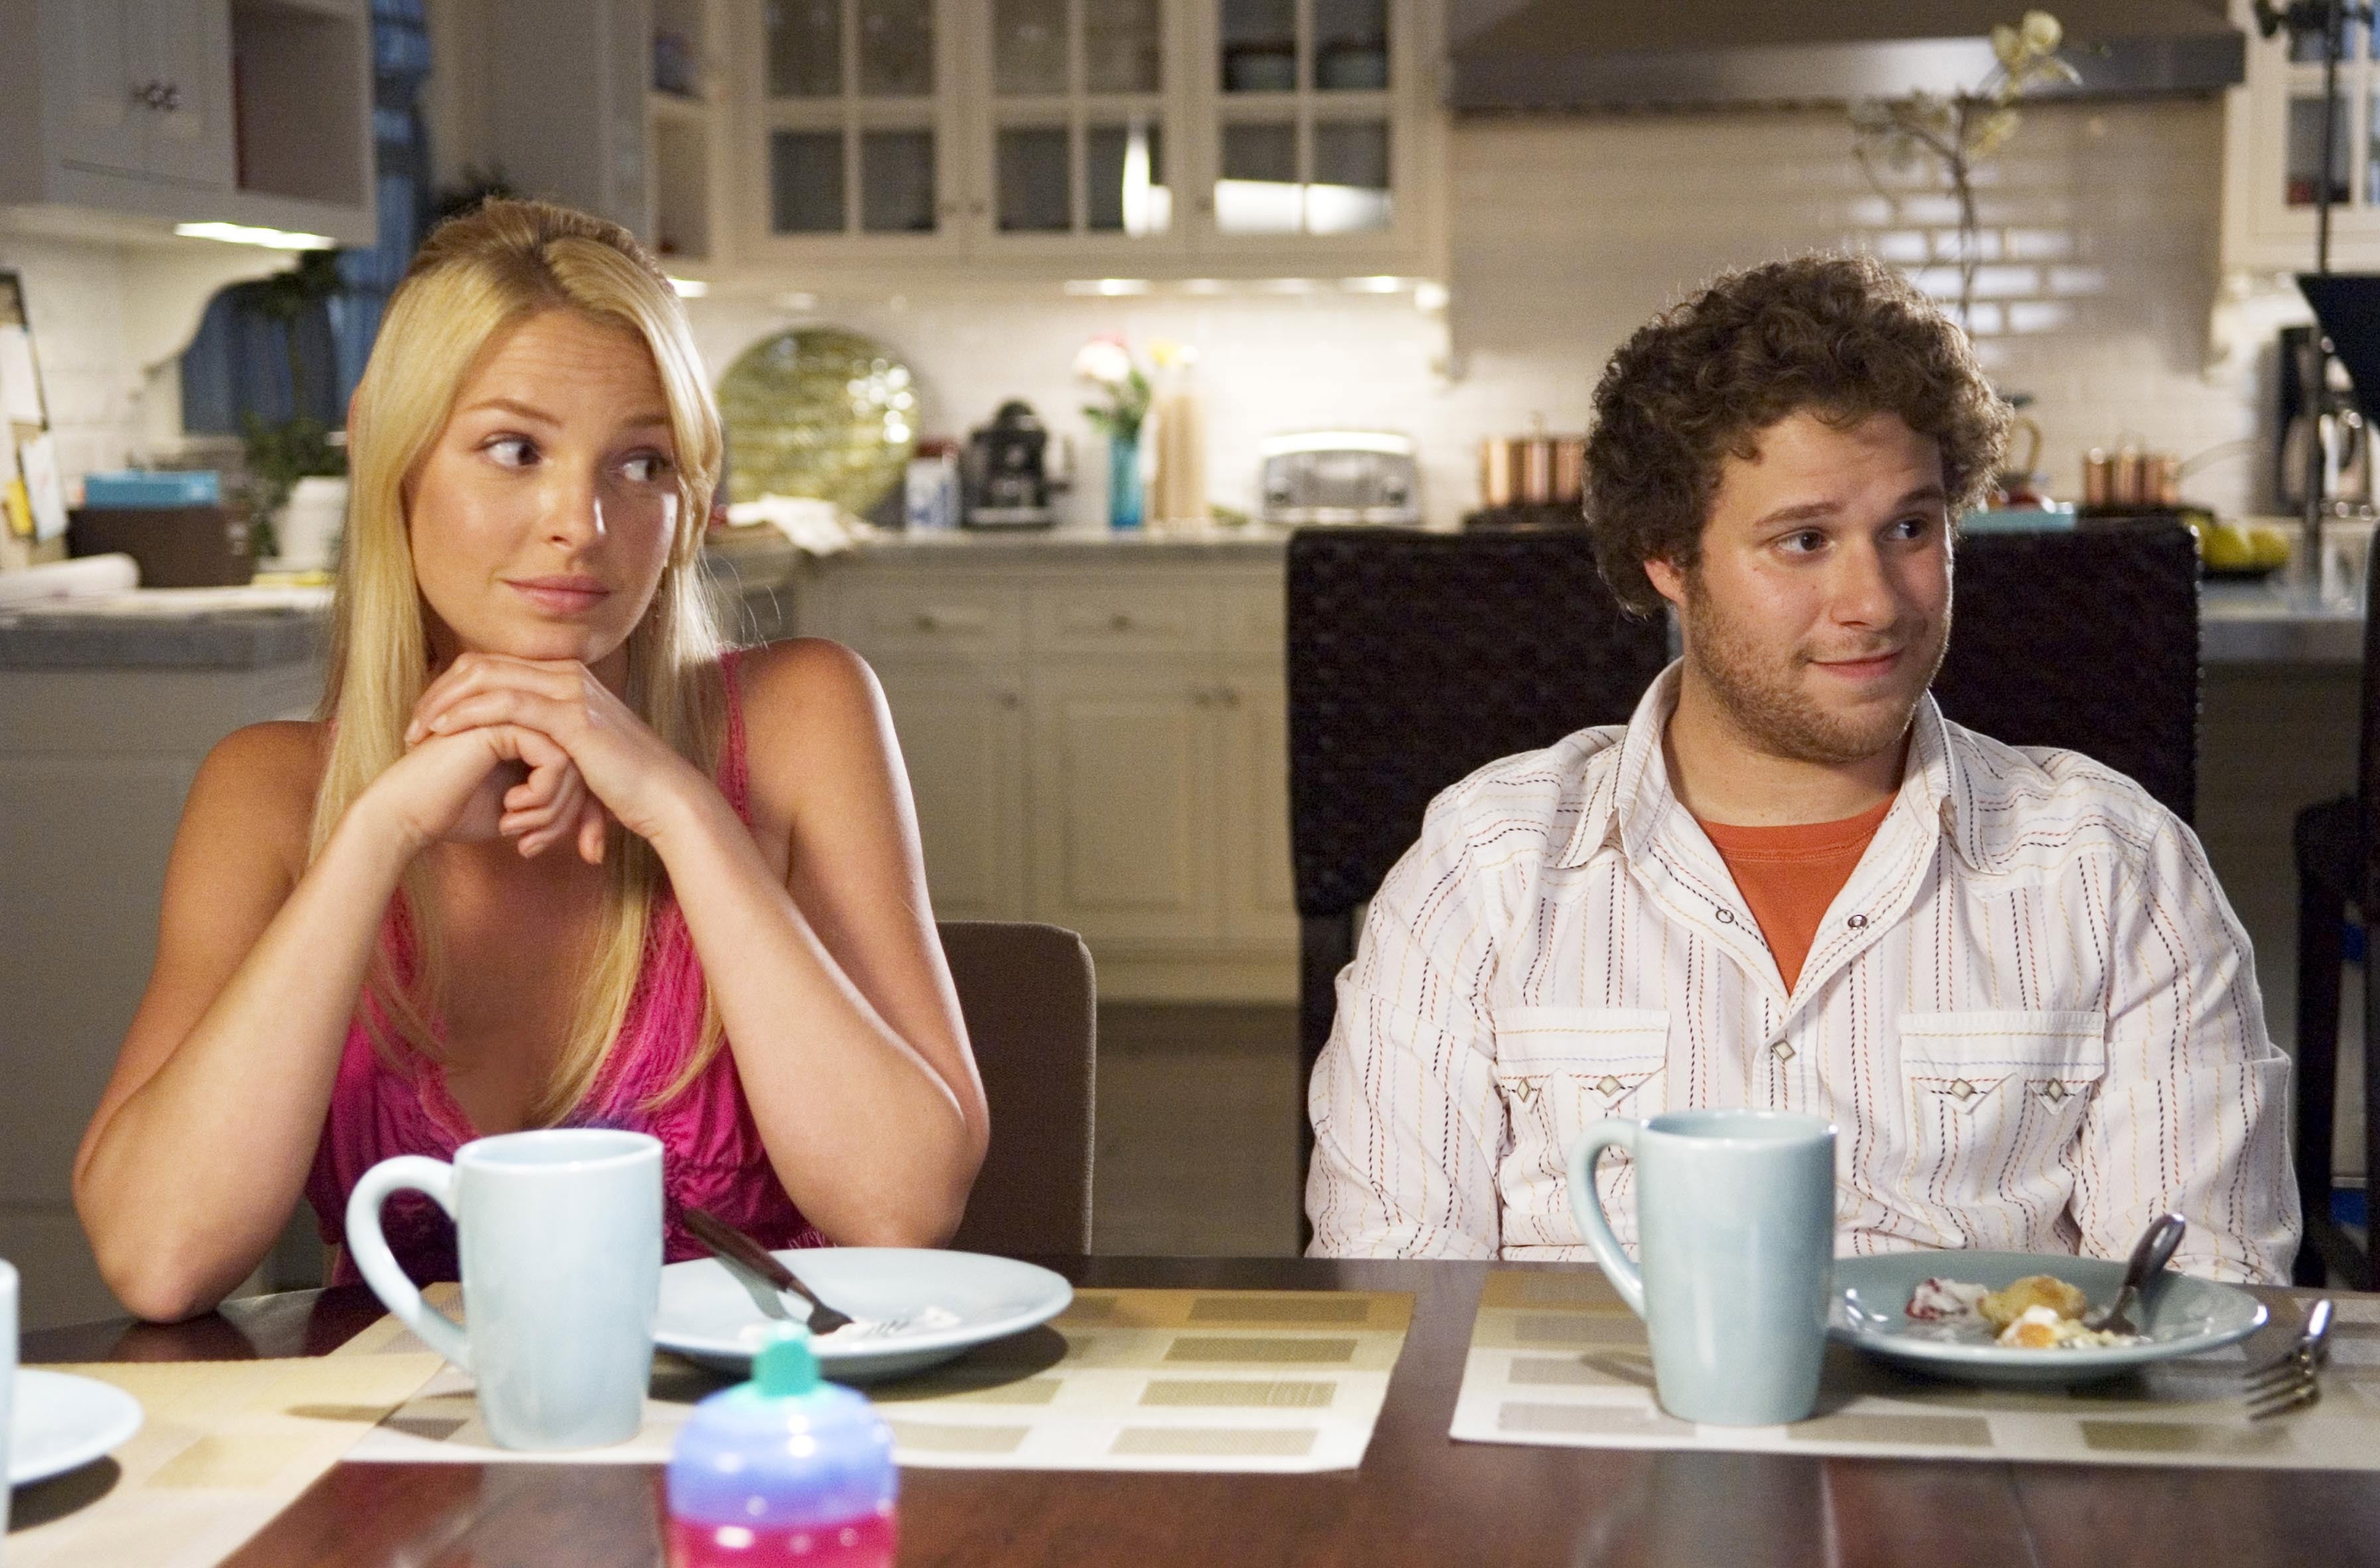 To Heigl, the women in Knocked Up were ‘humourless and uptight'